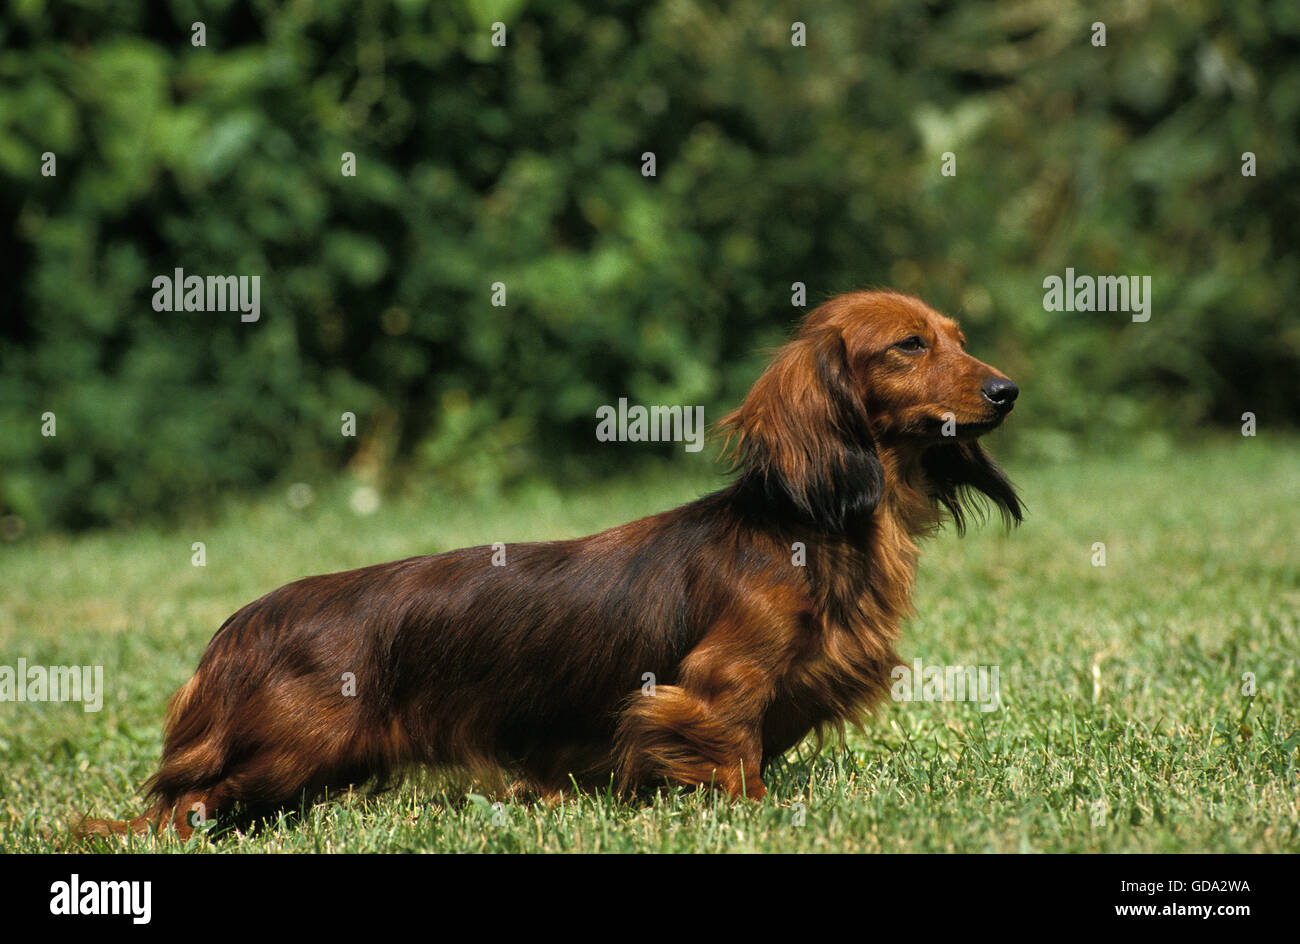 Long-Haired Dachshund, Adult on grass Stock Photo